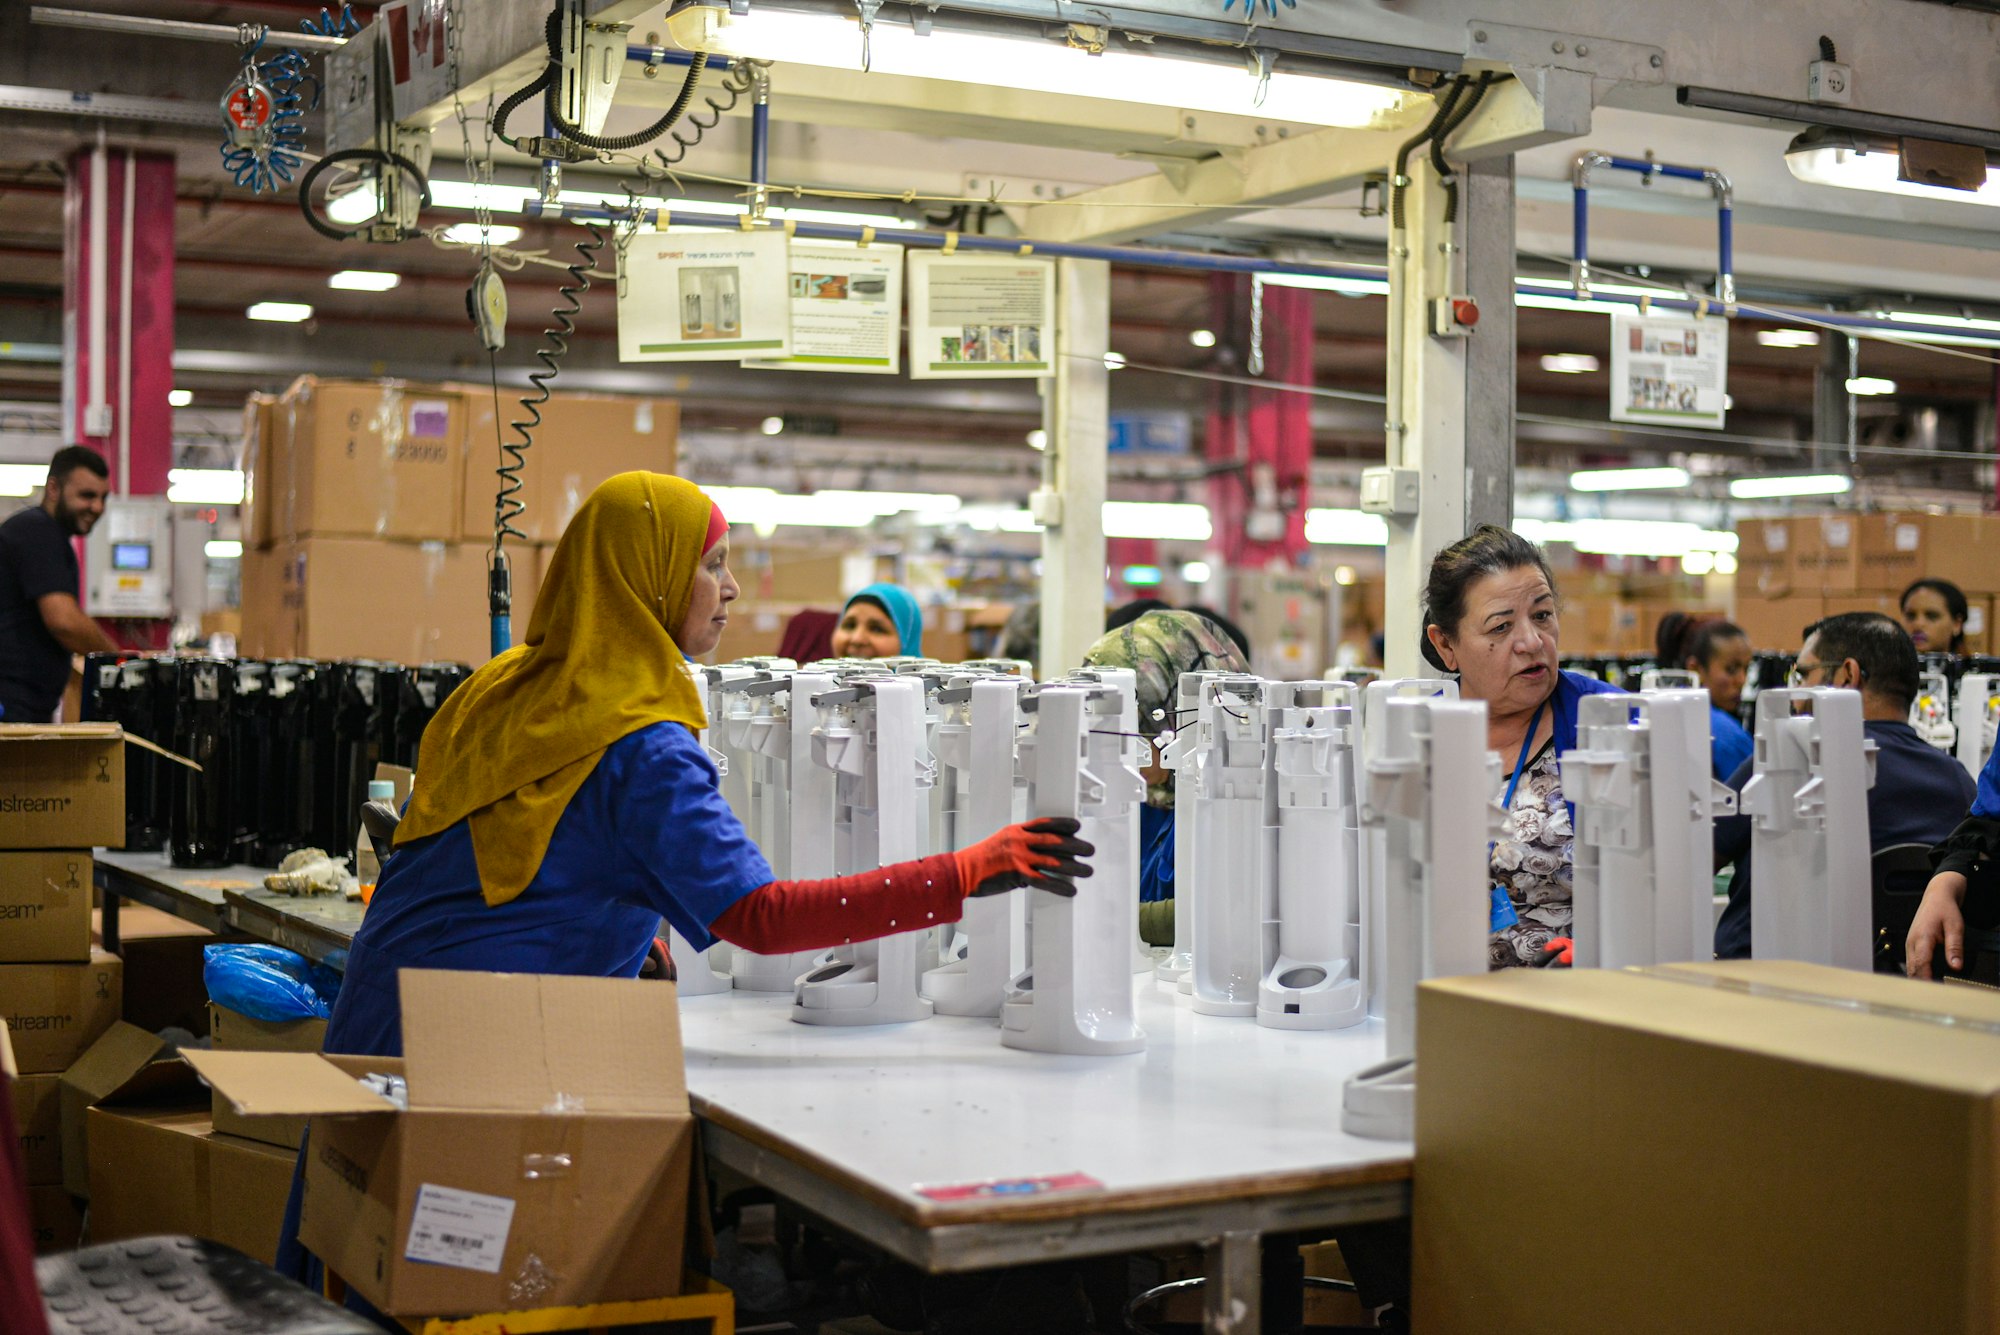 Women working on SodaSteam devices at the SodaStream factory in Israel. Shot during press trip to SodaStream factory in 2019.